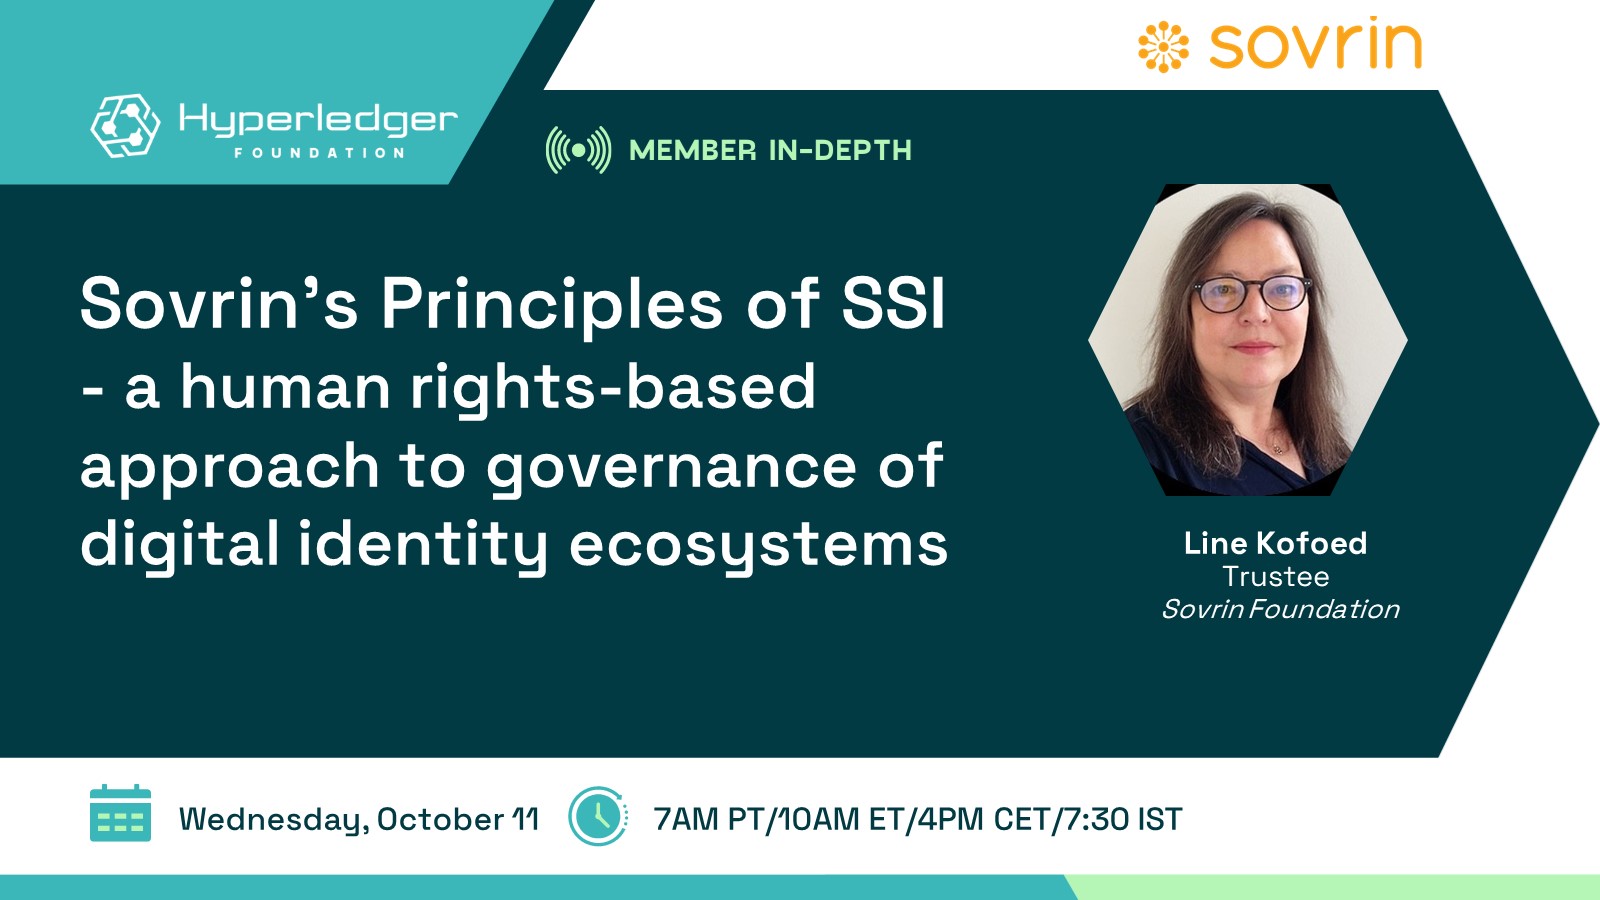 Hyperledger In-depth with Sovrin Foundation: Sovrins Principles of SSI featured image